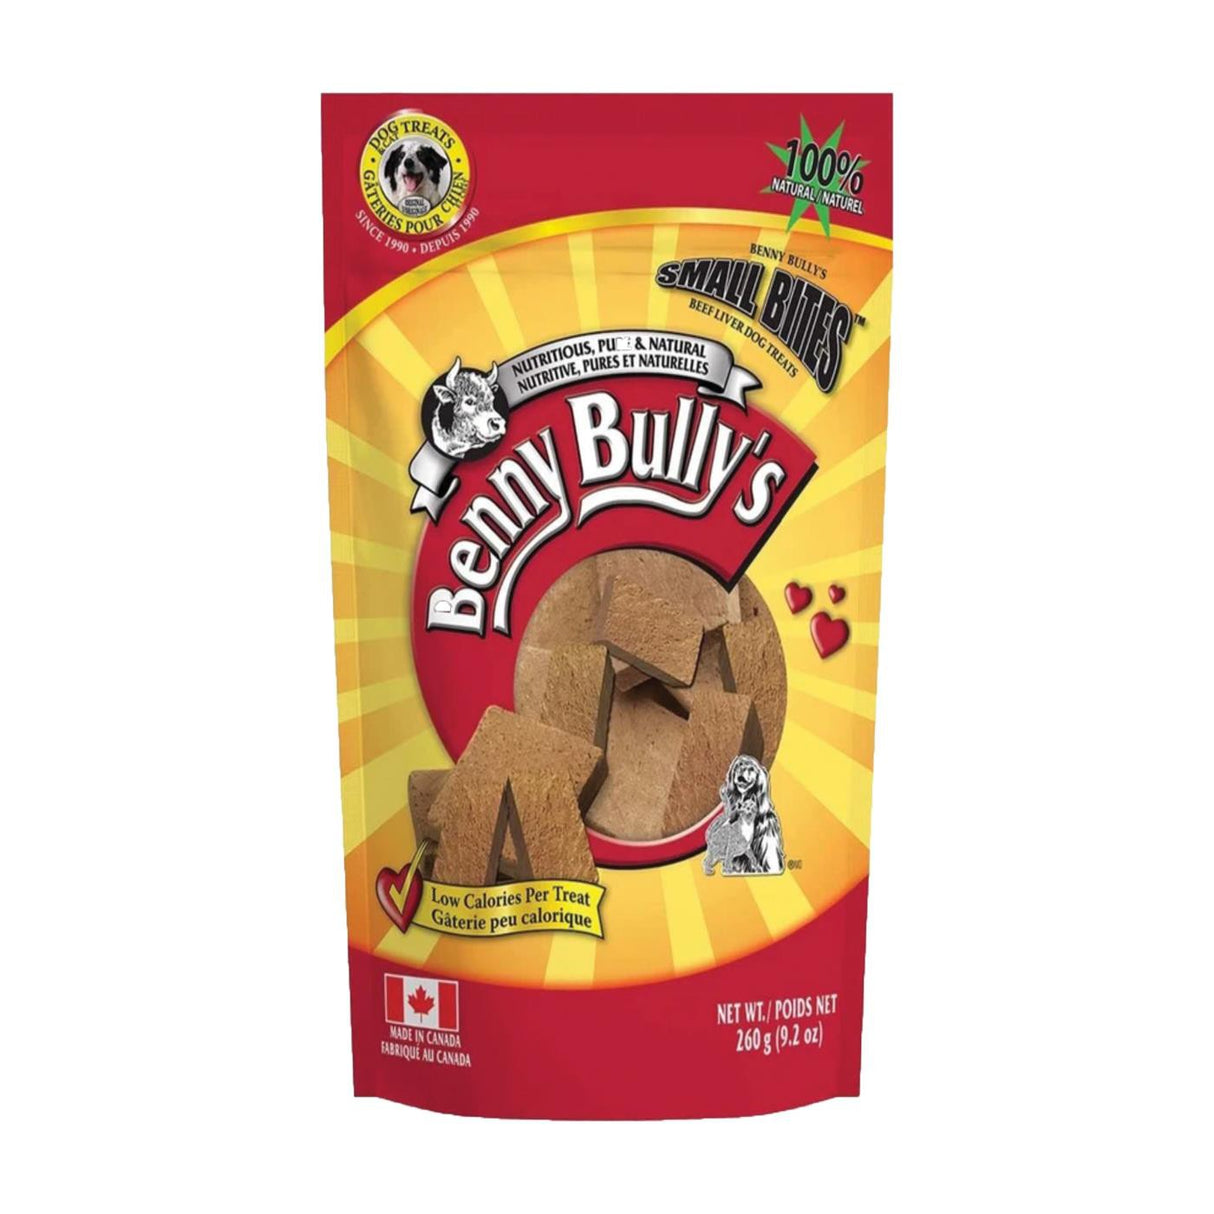 Benny Bully's Small Bite Liver Chops 260 g